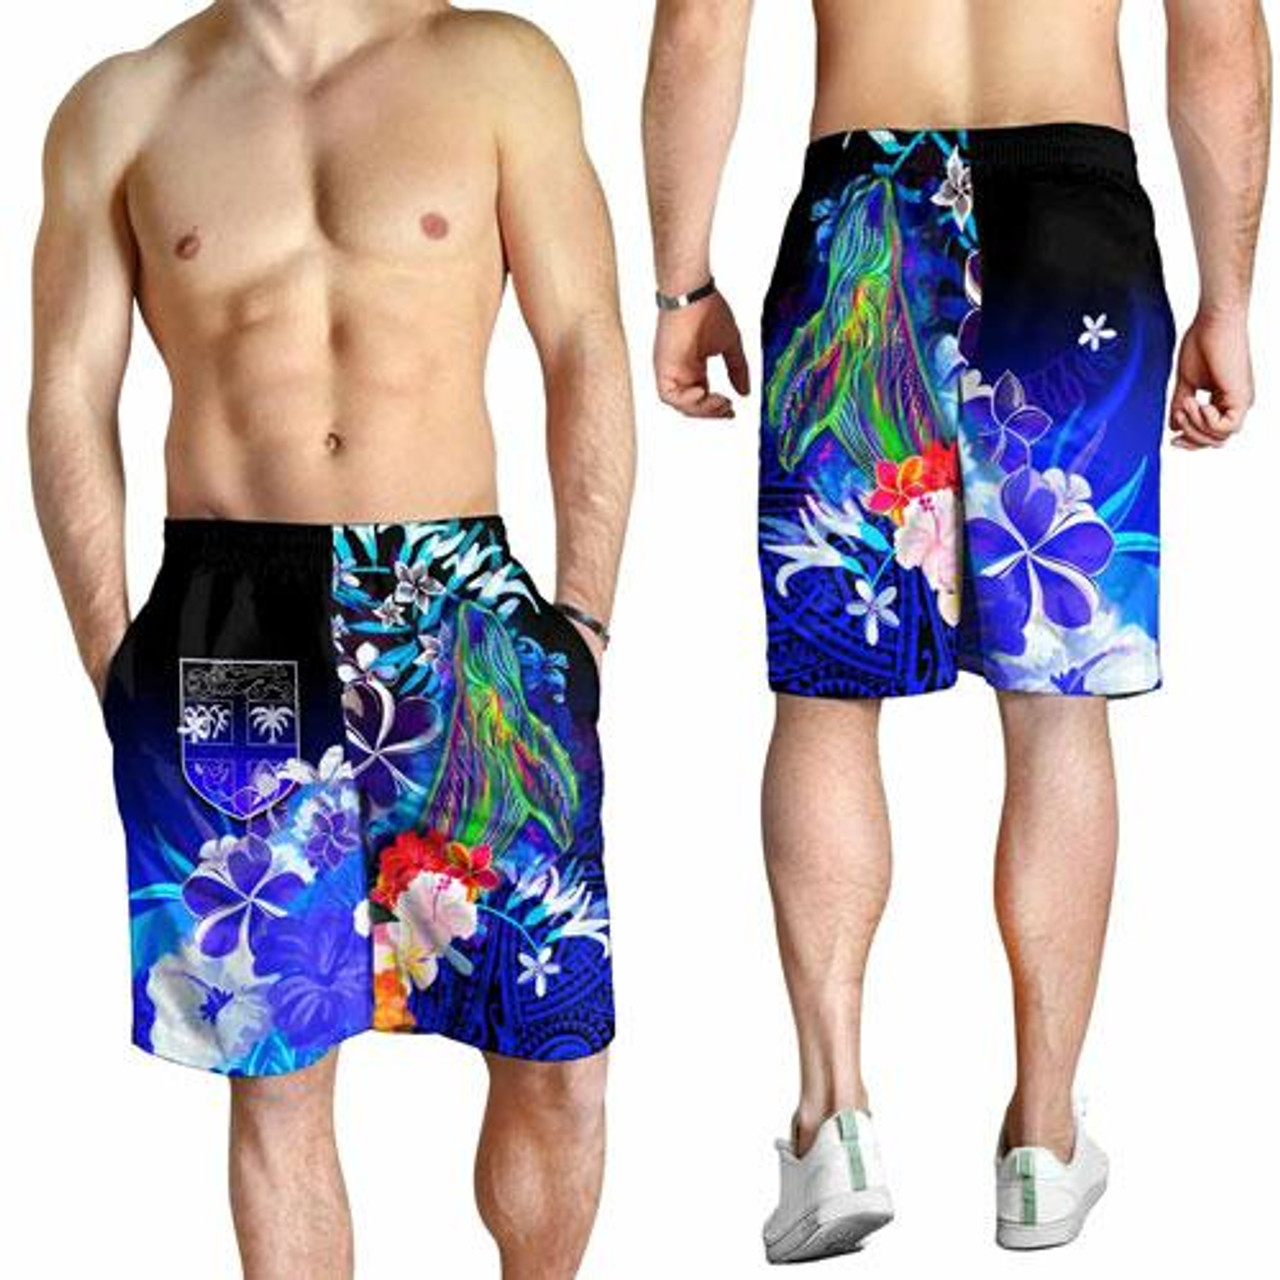 Fiji Men Shorts - Humpback Whale with Tropical Flowers (Blue) 3